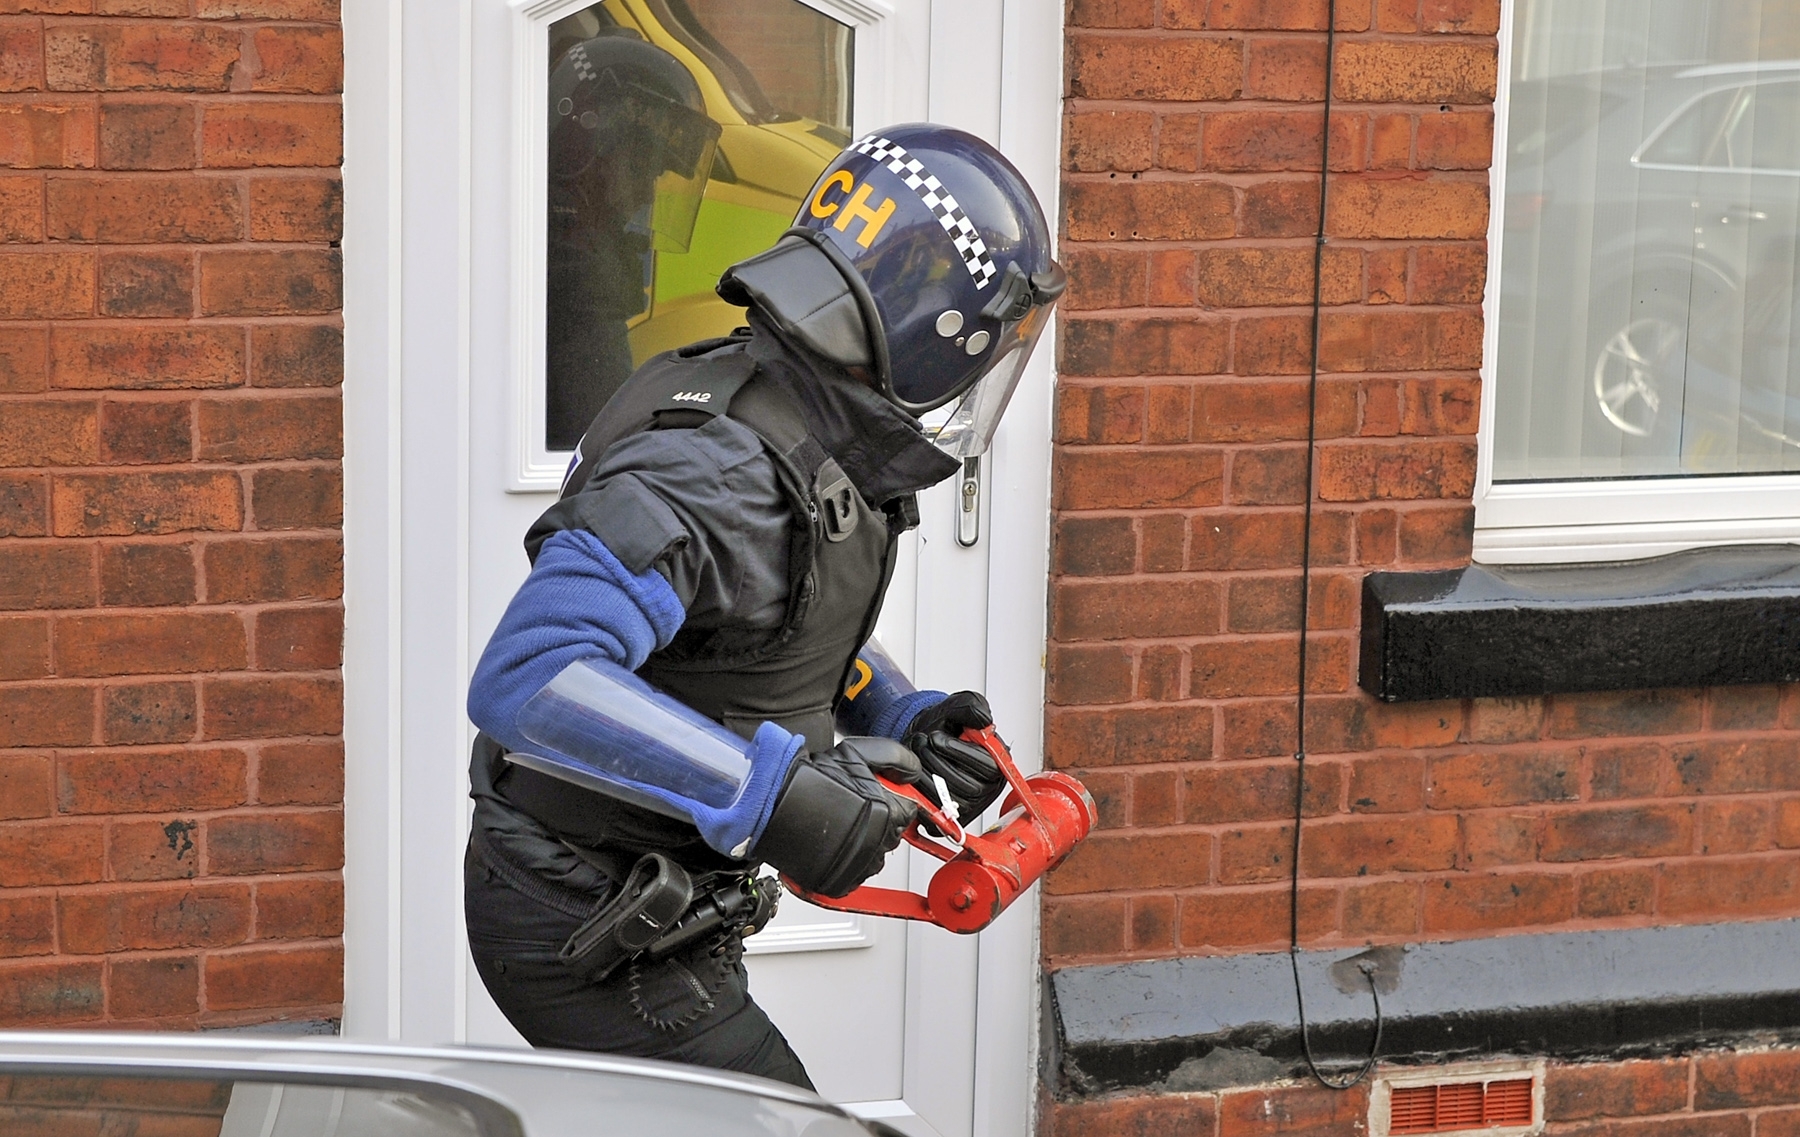 Police raids across Merseyside include this address in St Helens.